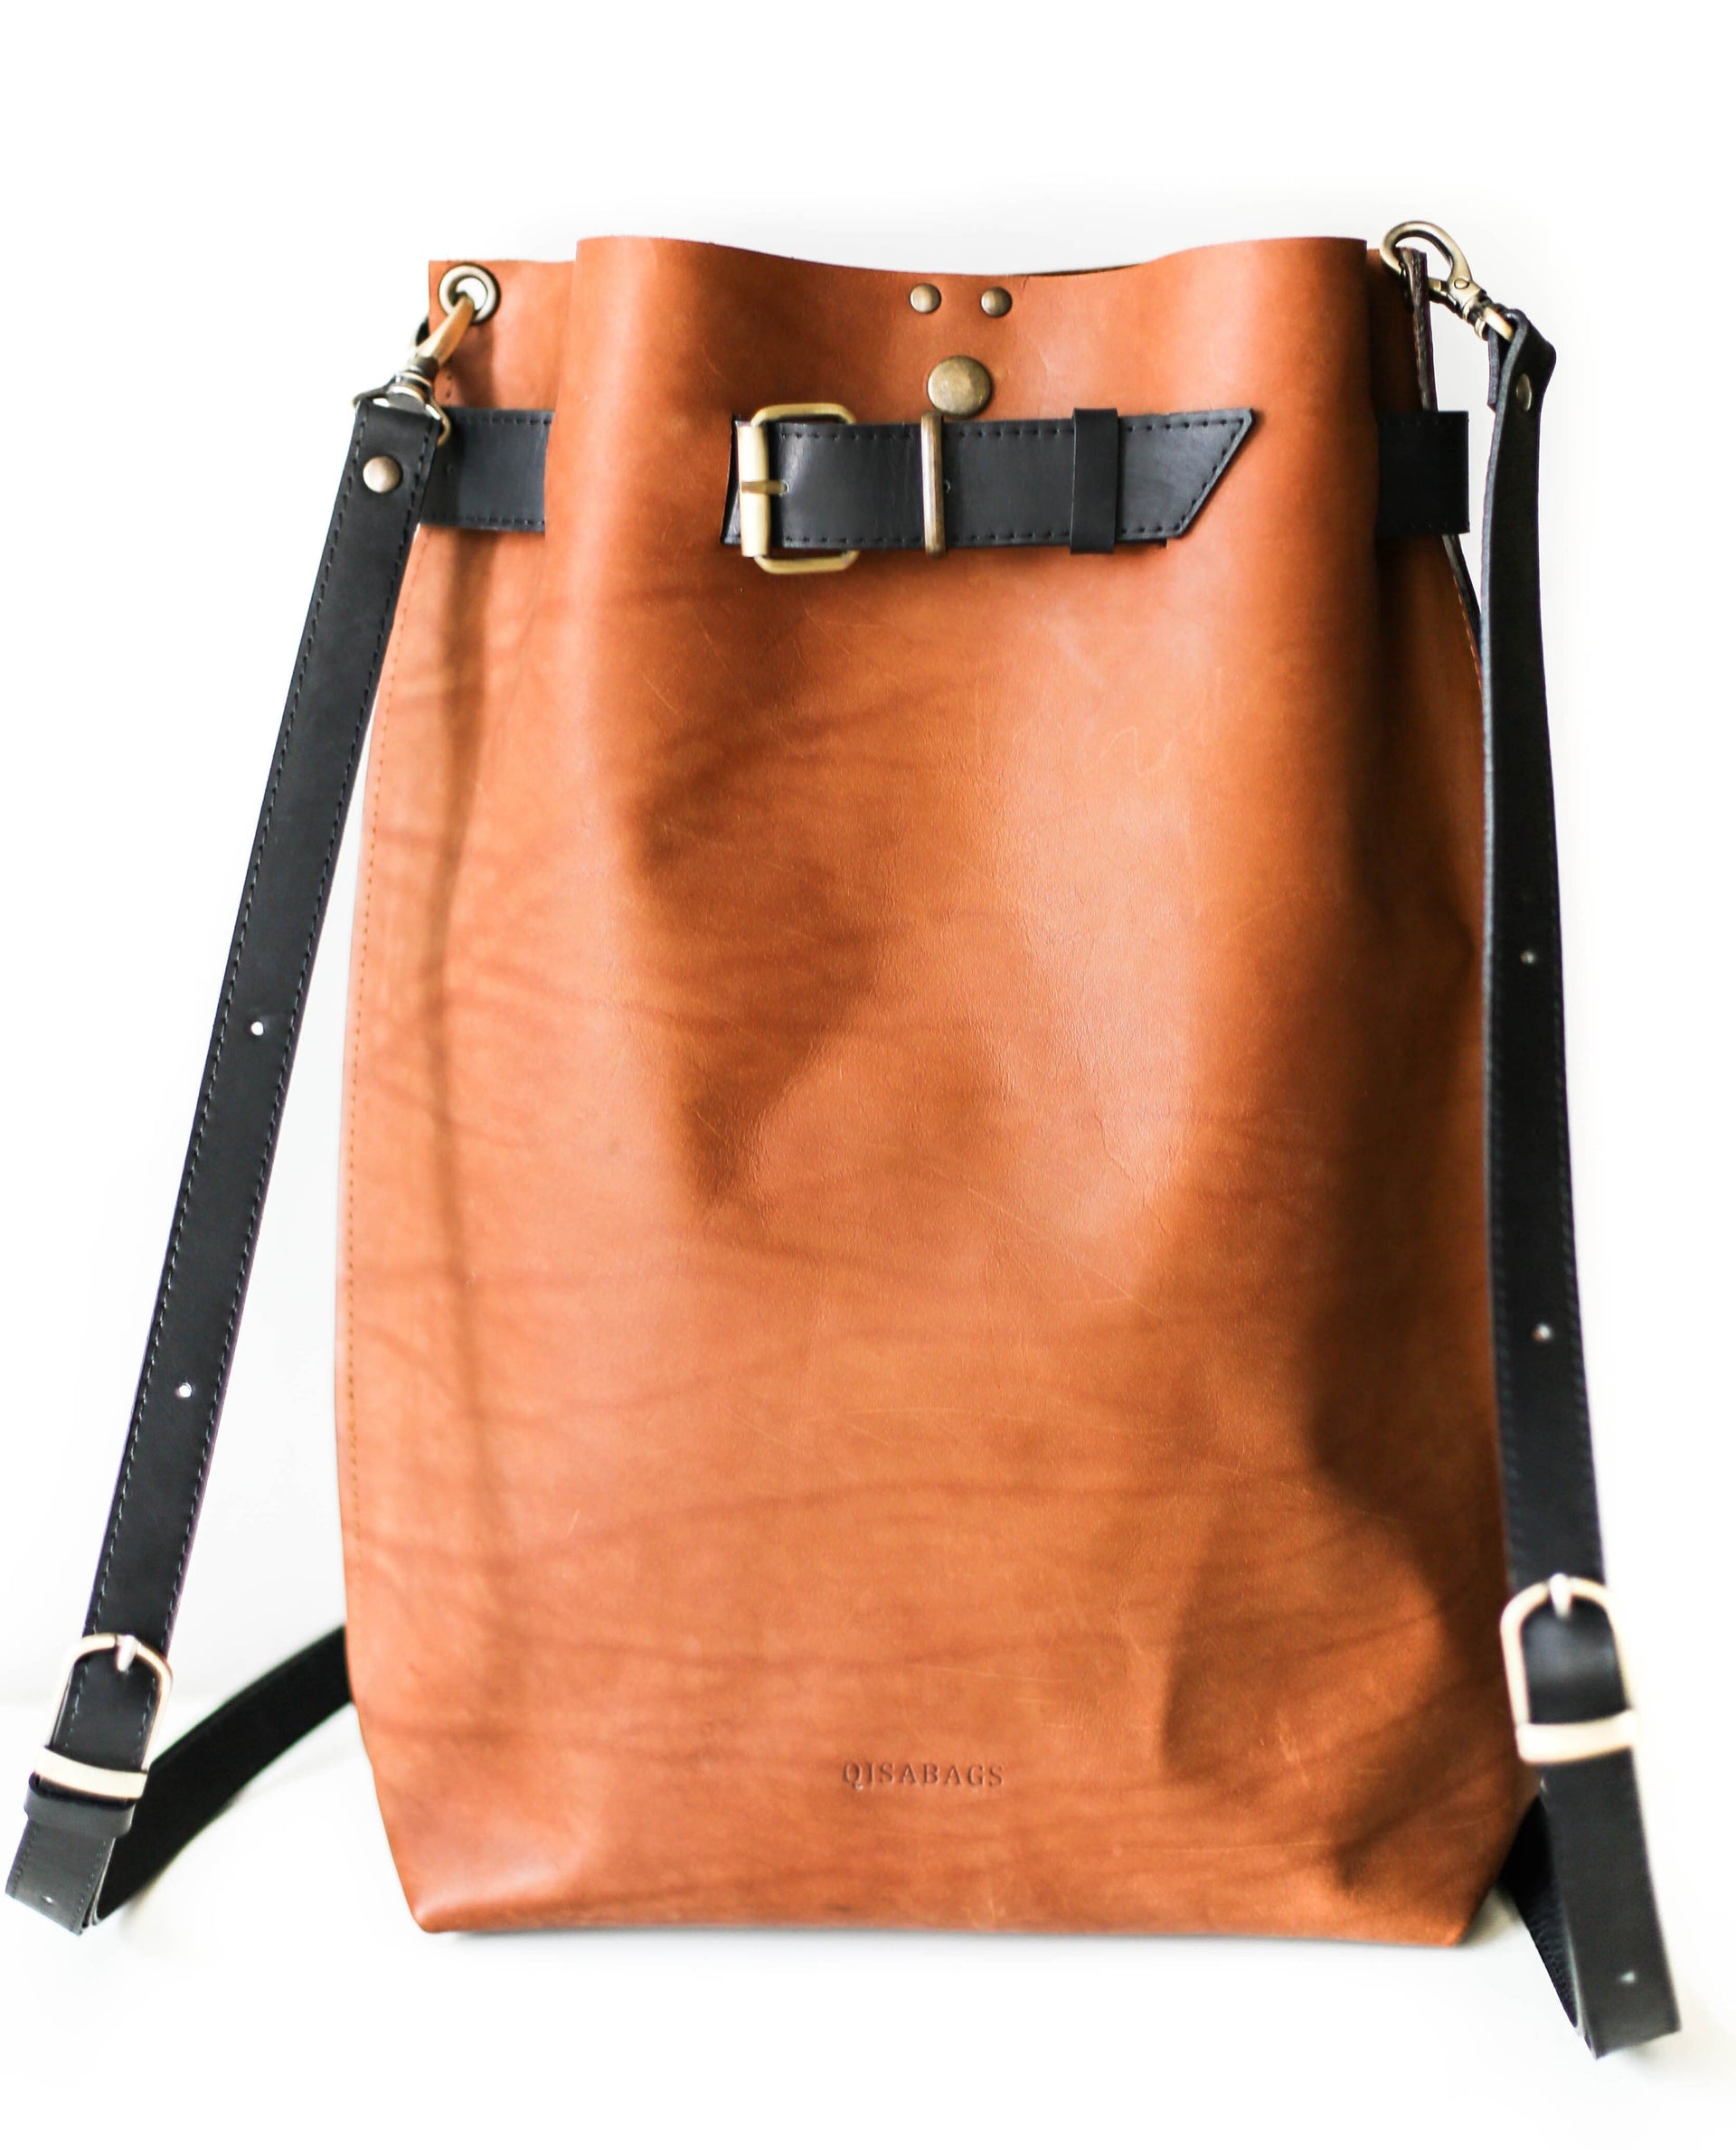 Men's Brown Leather Backpack purse